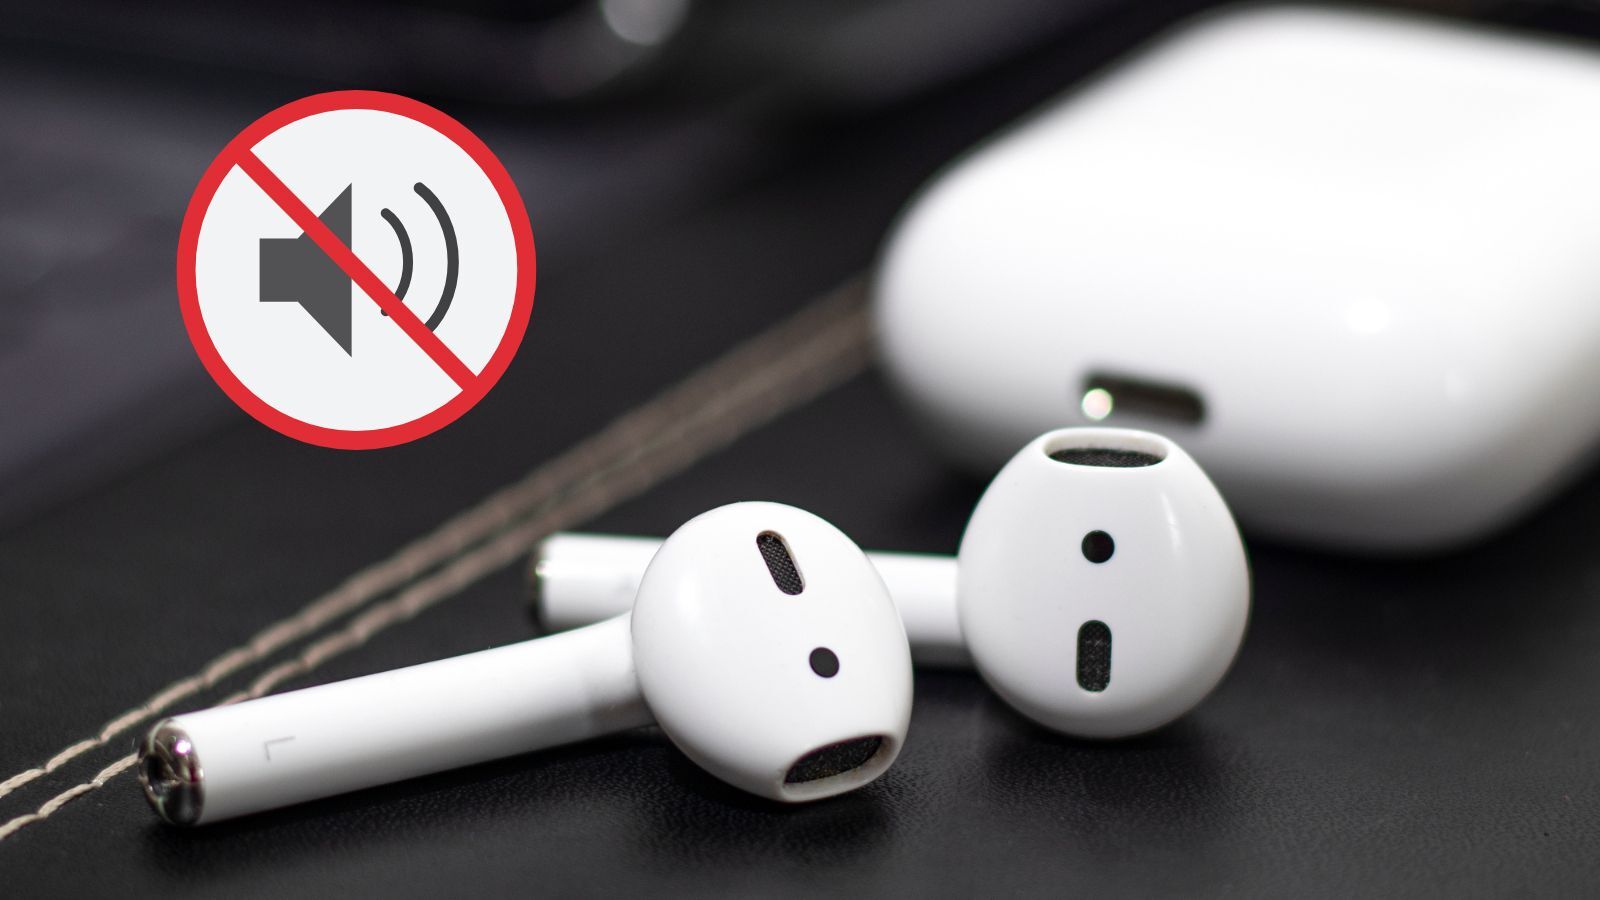 AirPods Connected But No Sound (Reasons and Fix Ways)